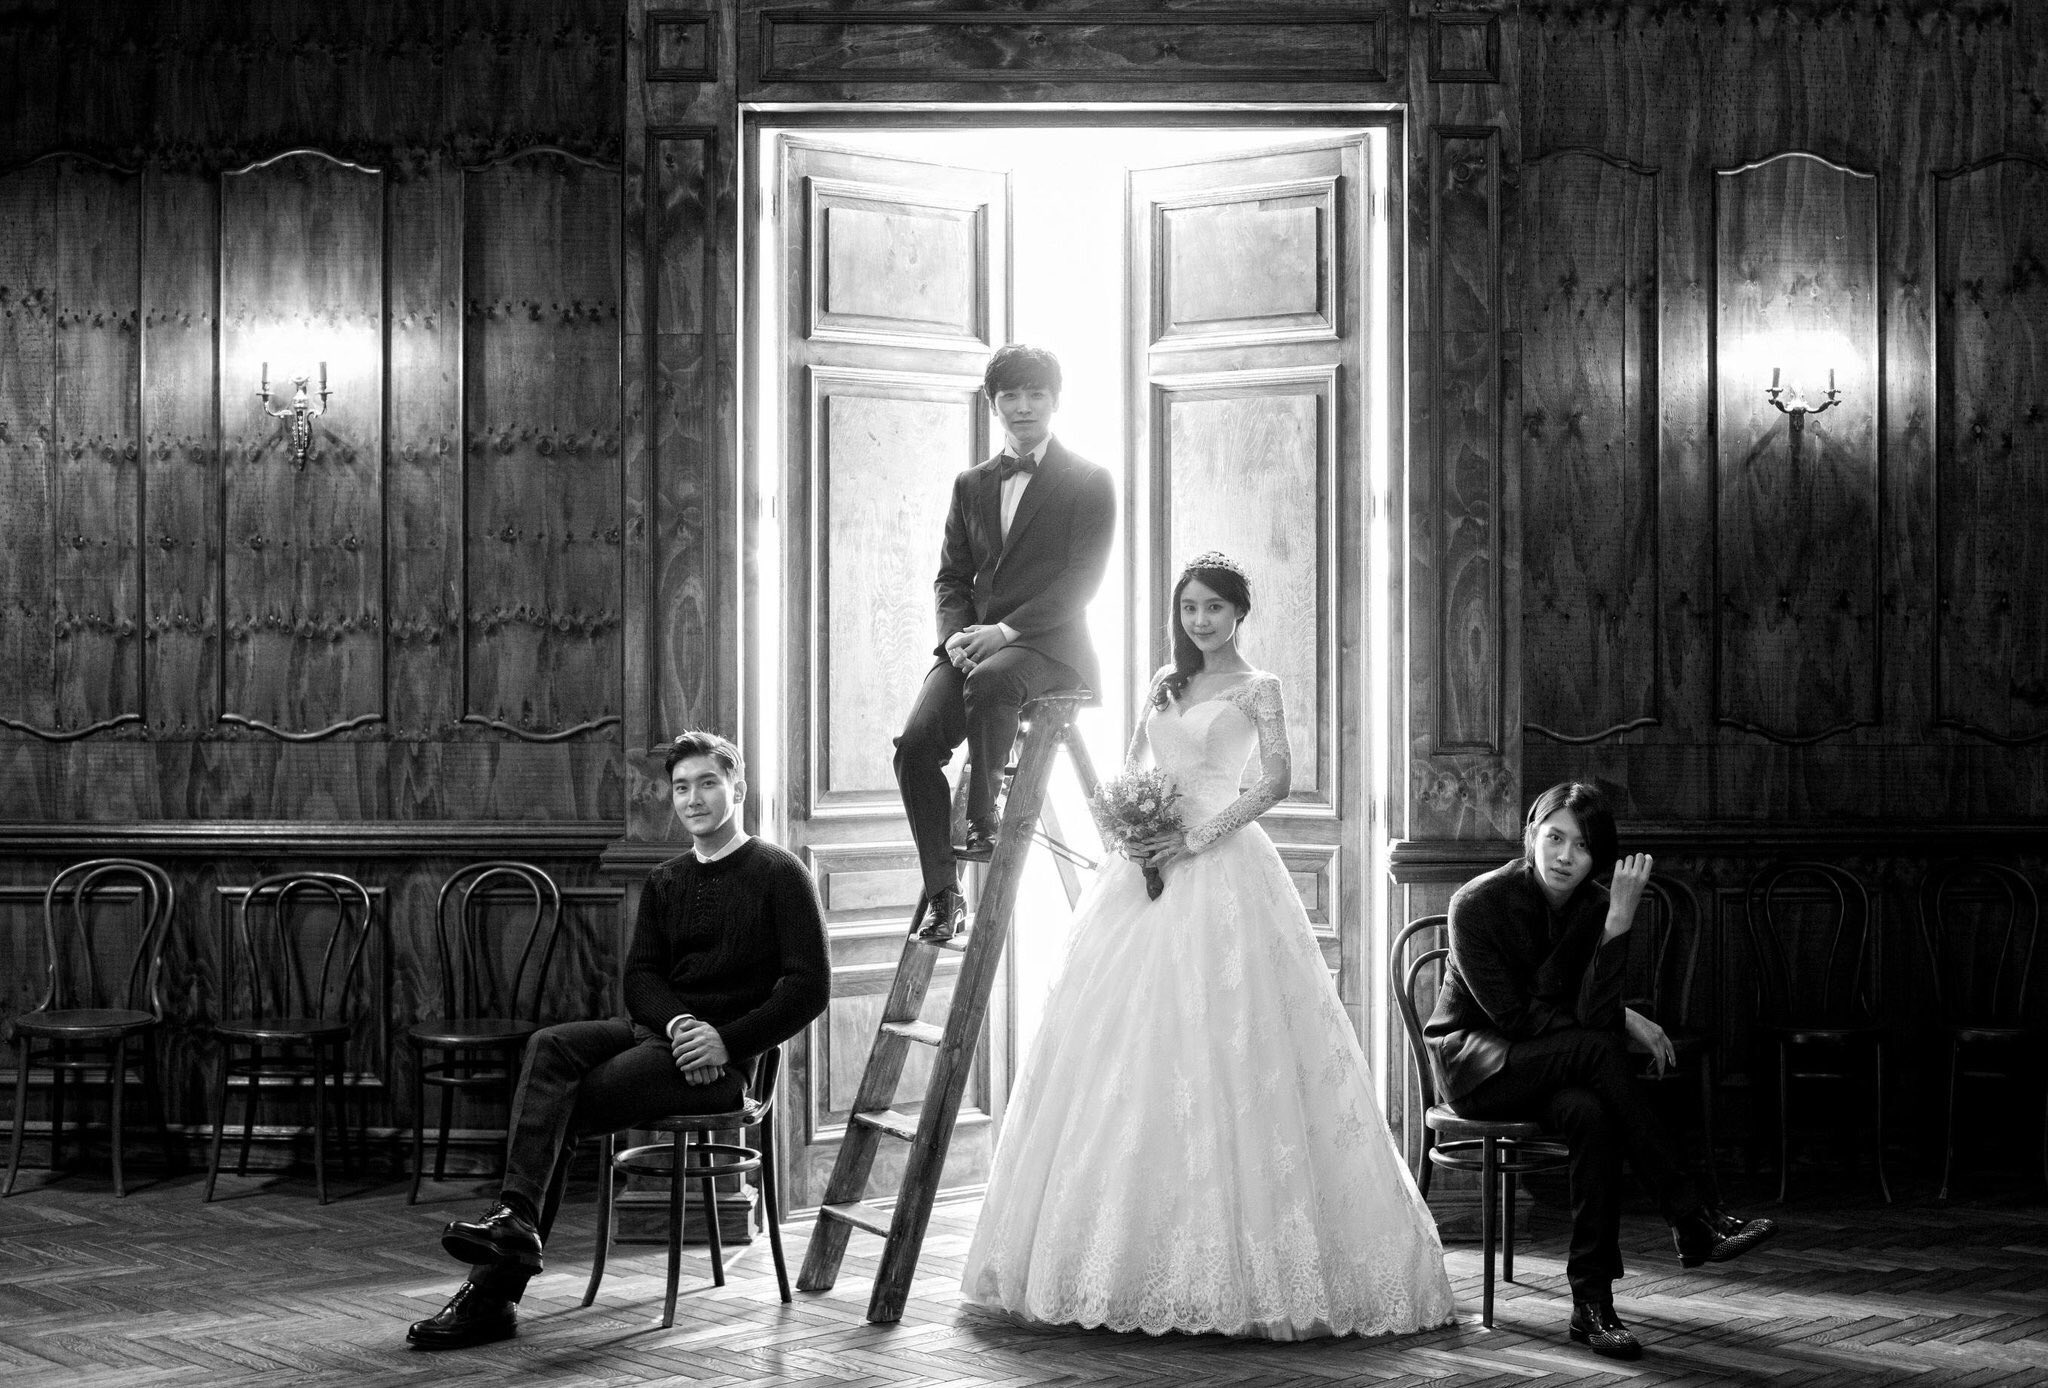 Marriage siwon talk about Official Stills